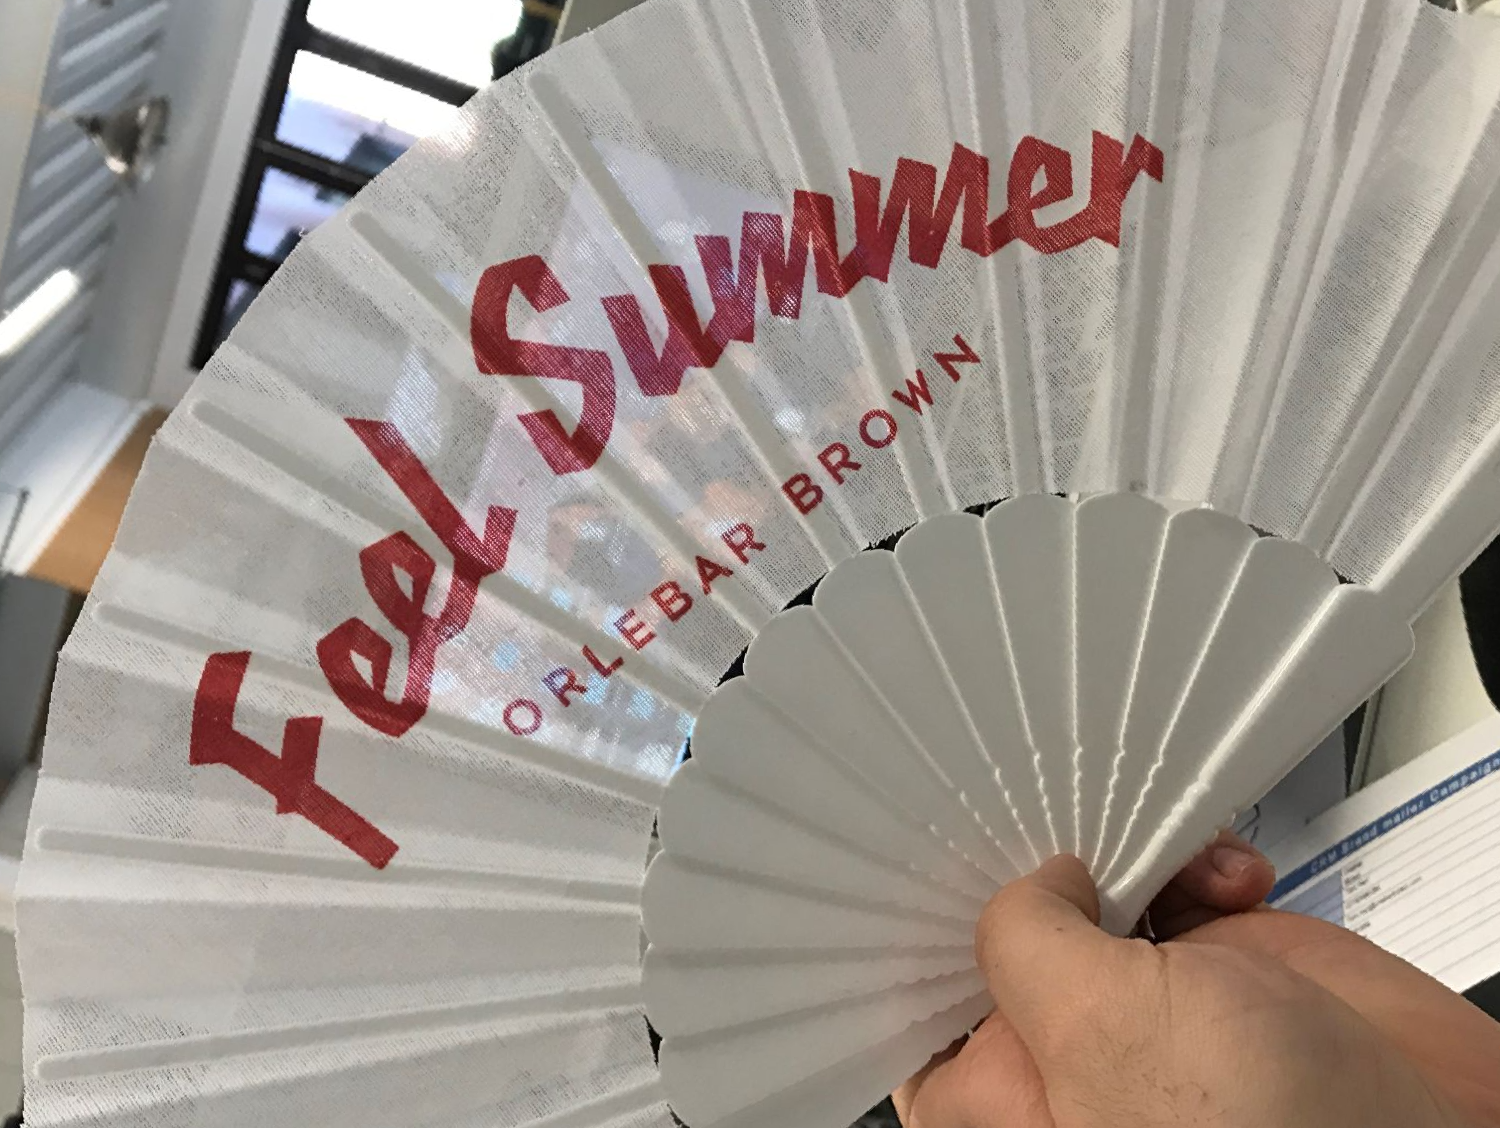 Wedding Fans for Guests Personalised Custom Hand Fan Custom Printed Fans  Promotional Hand Fans Custom Made Hand Fans Personalized Wood Hand Held Fans  - China Wood Fans and Hand Fan price